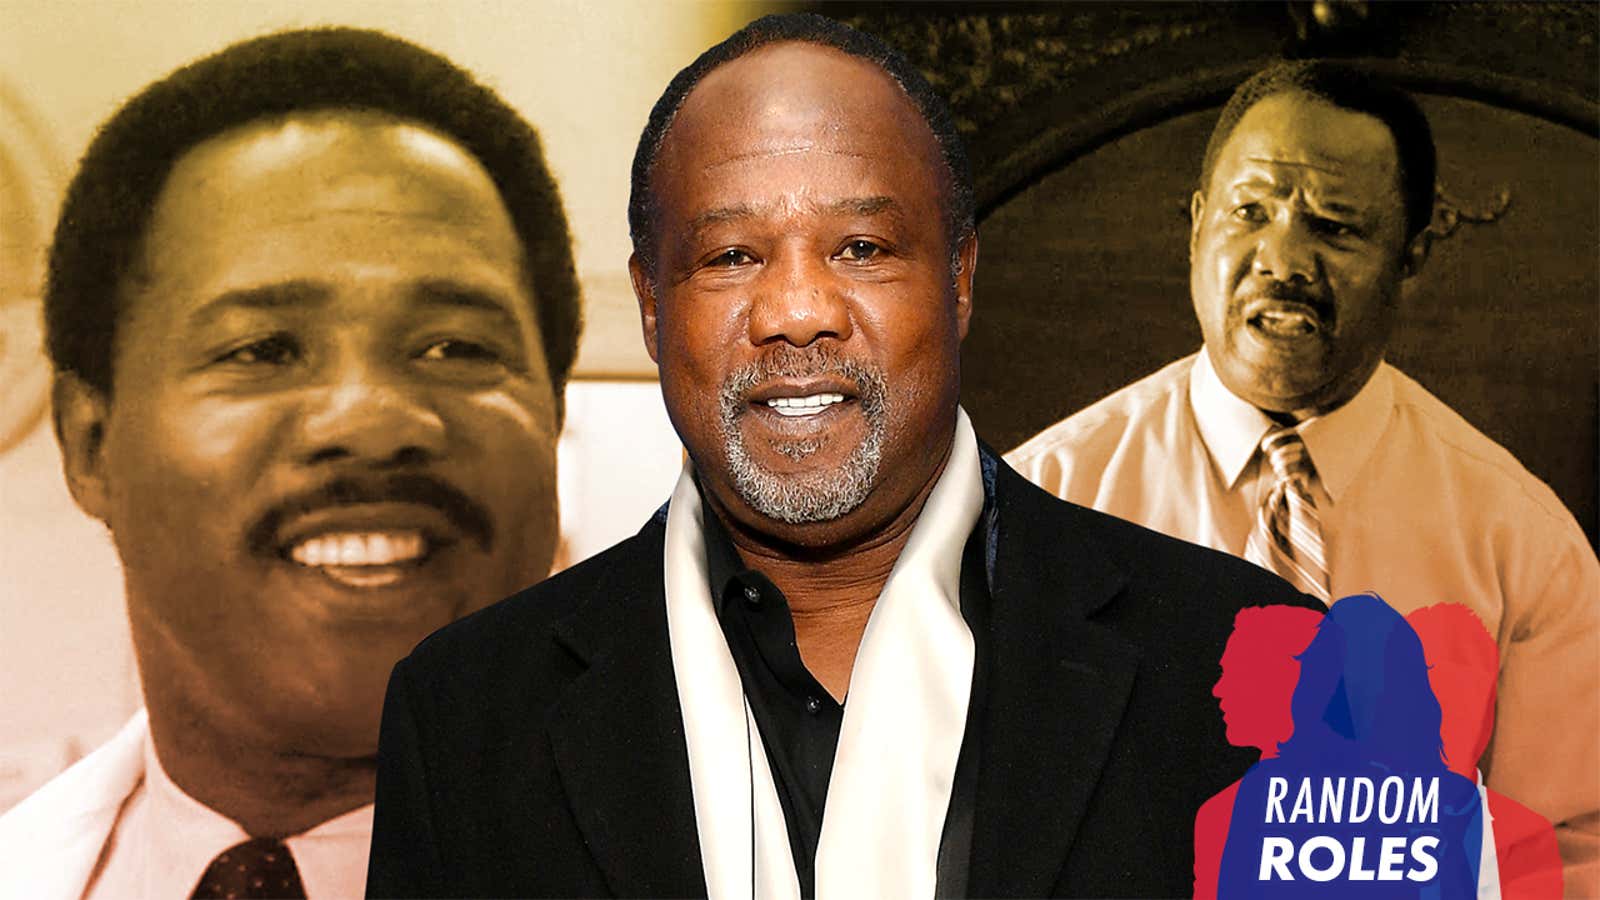 From left: Isiah Whitlock Jr. in Goodfellas (screenshot/Warner Bros.), at a 2019 screening event for Captain Marvel (Dia Dipasupil/Getty Images), and in The Wire (screenshot/HBO)